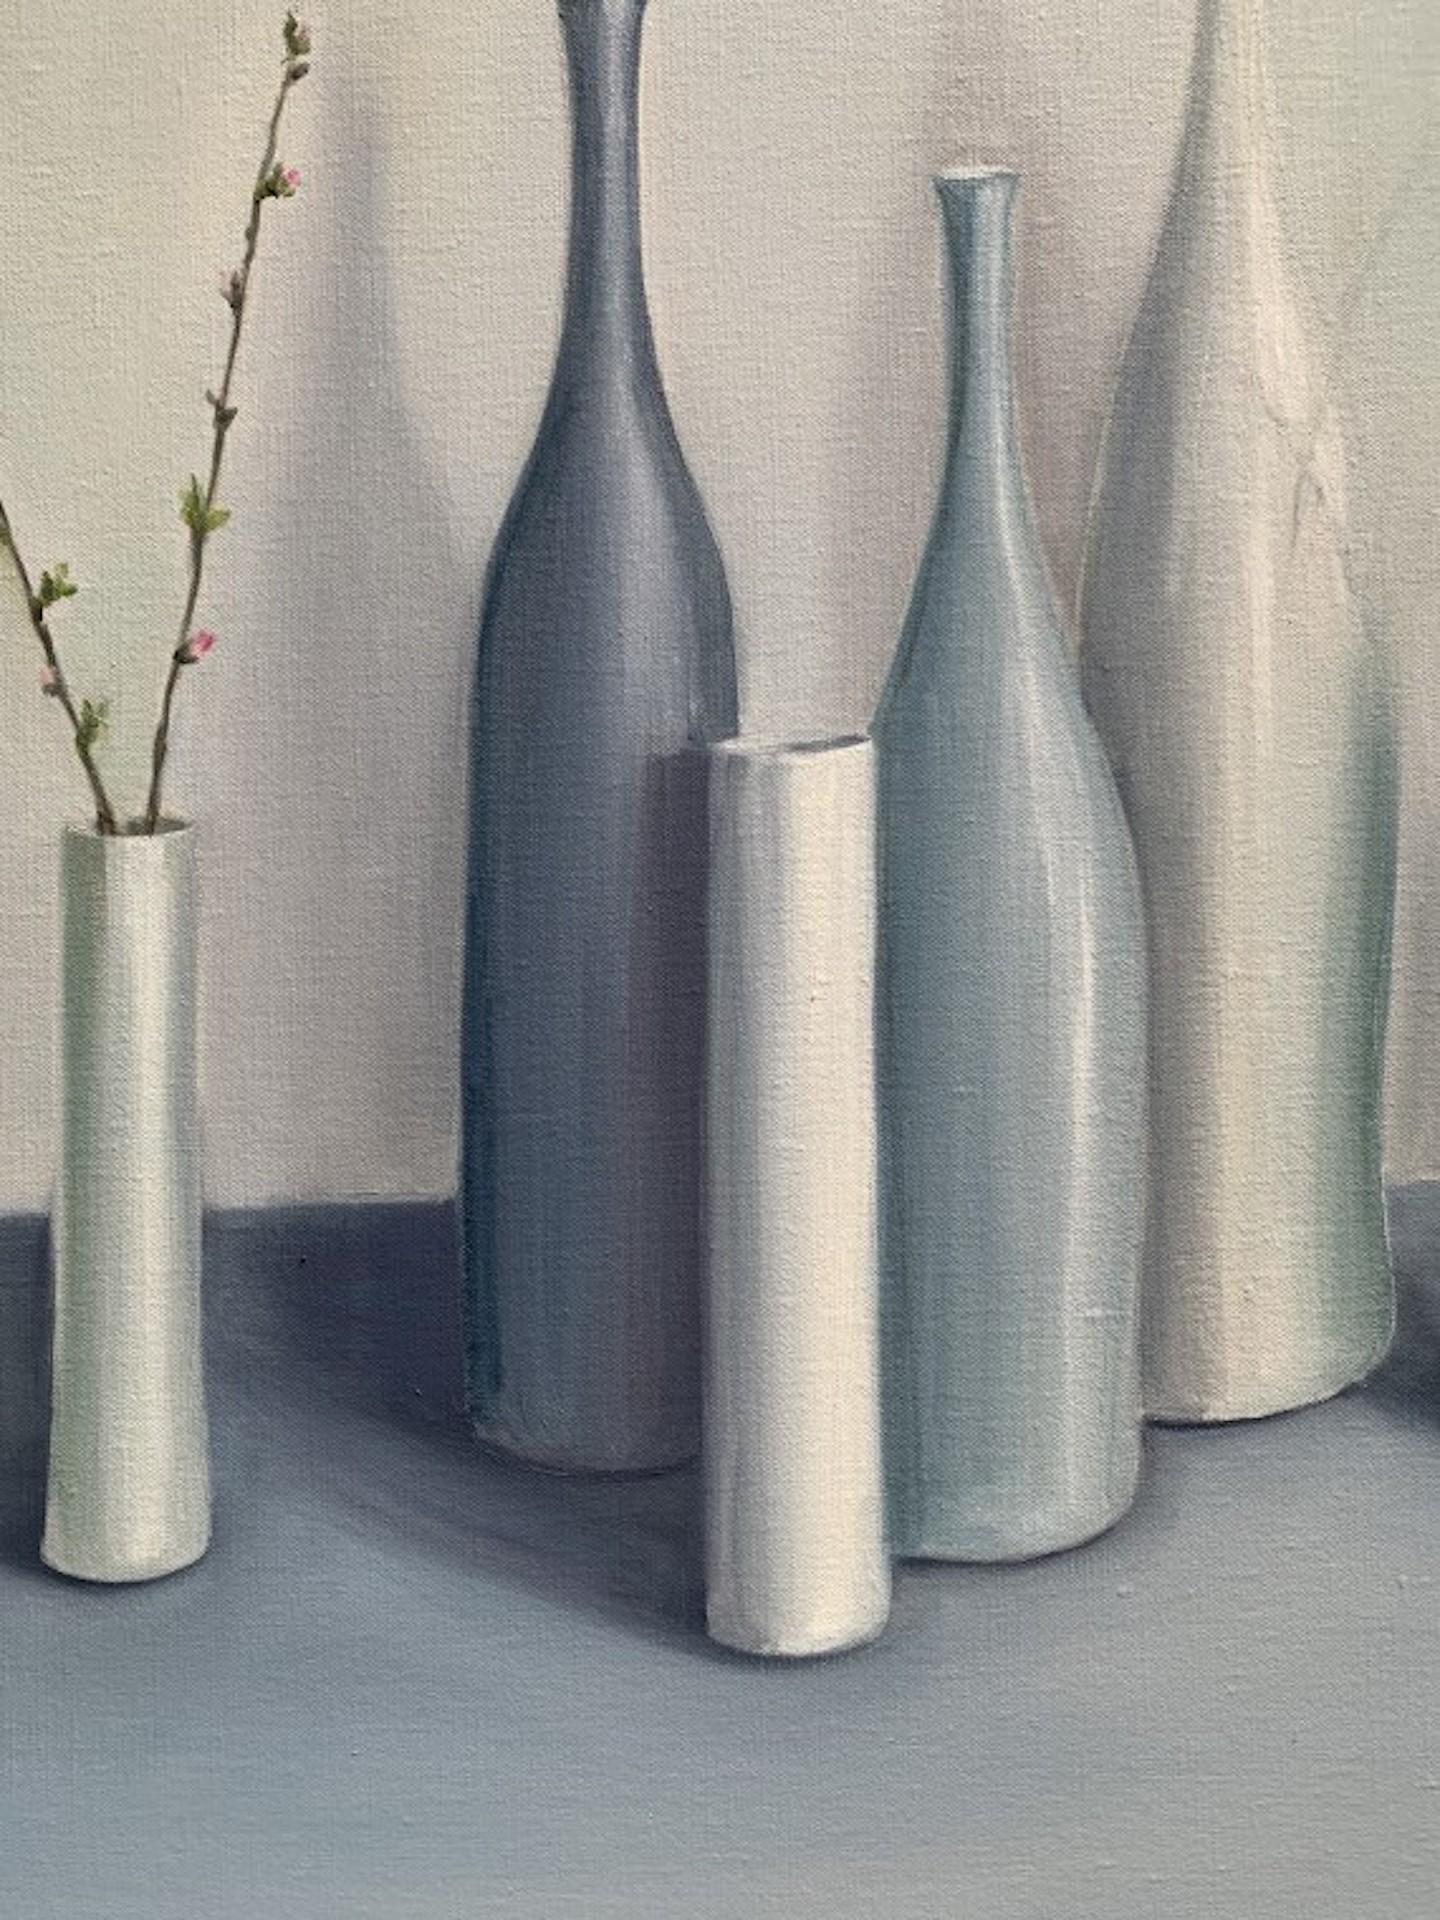 Jonquil Williamson, Bottles and Cylinders with Cherry Blossom Twigs 1